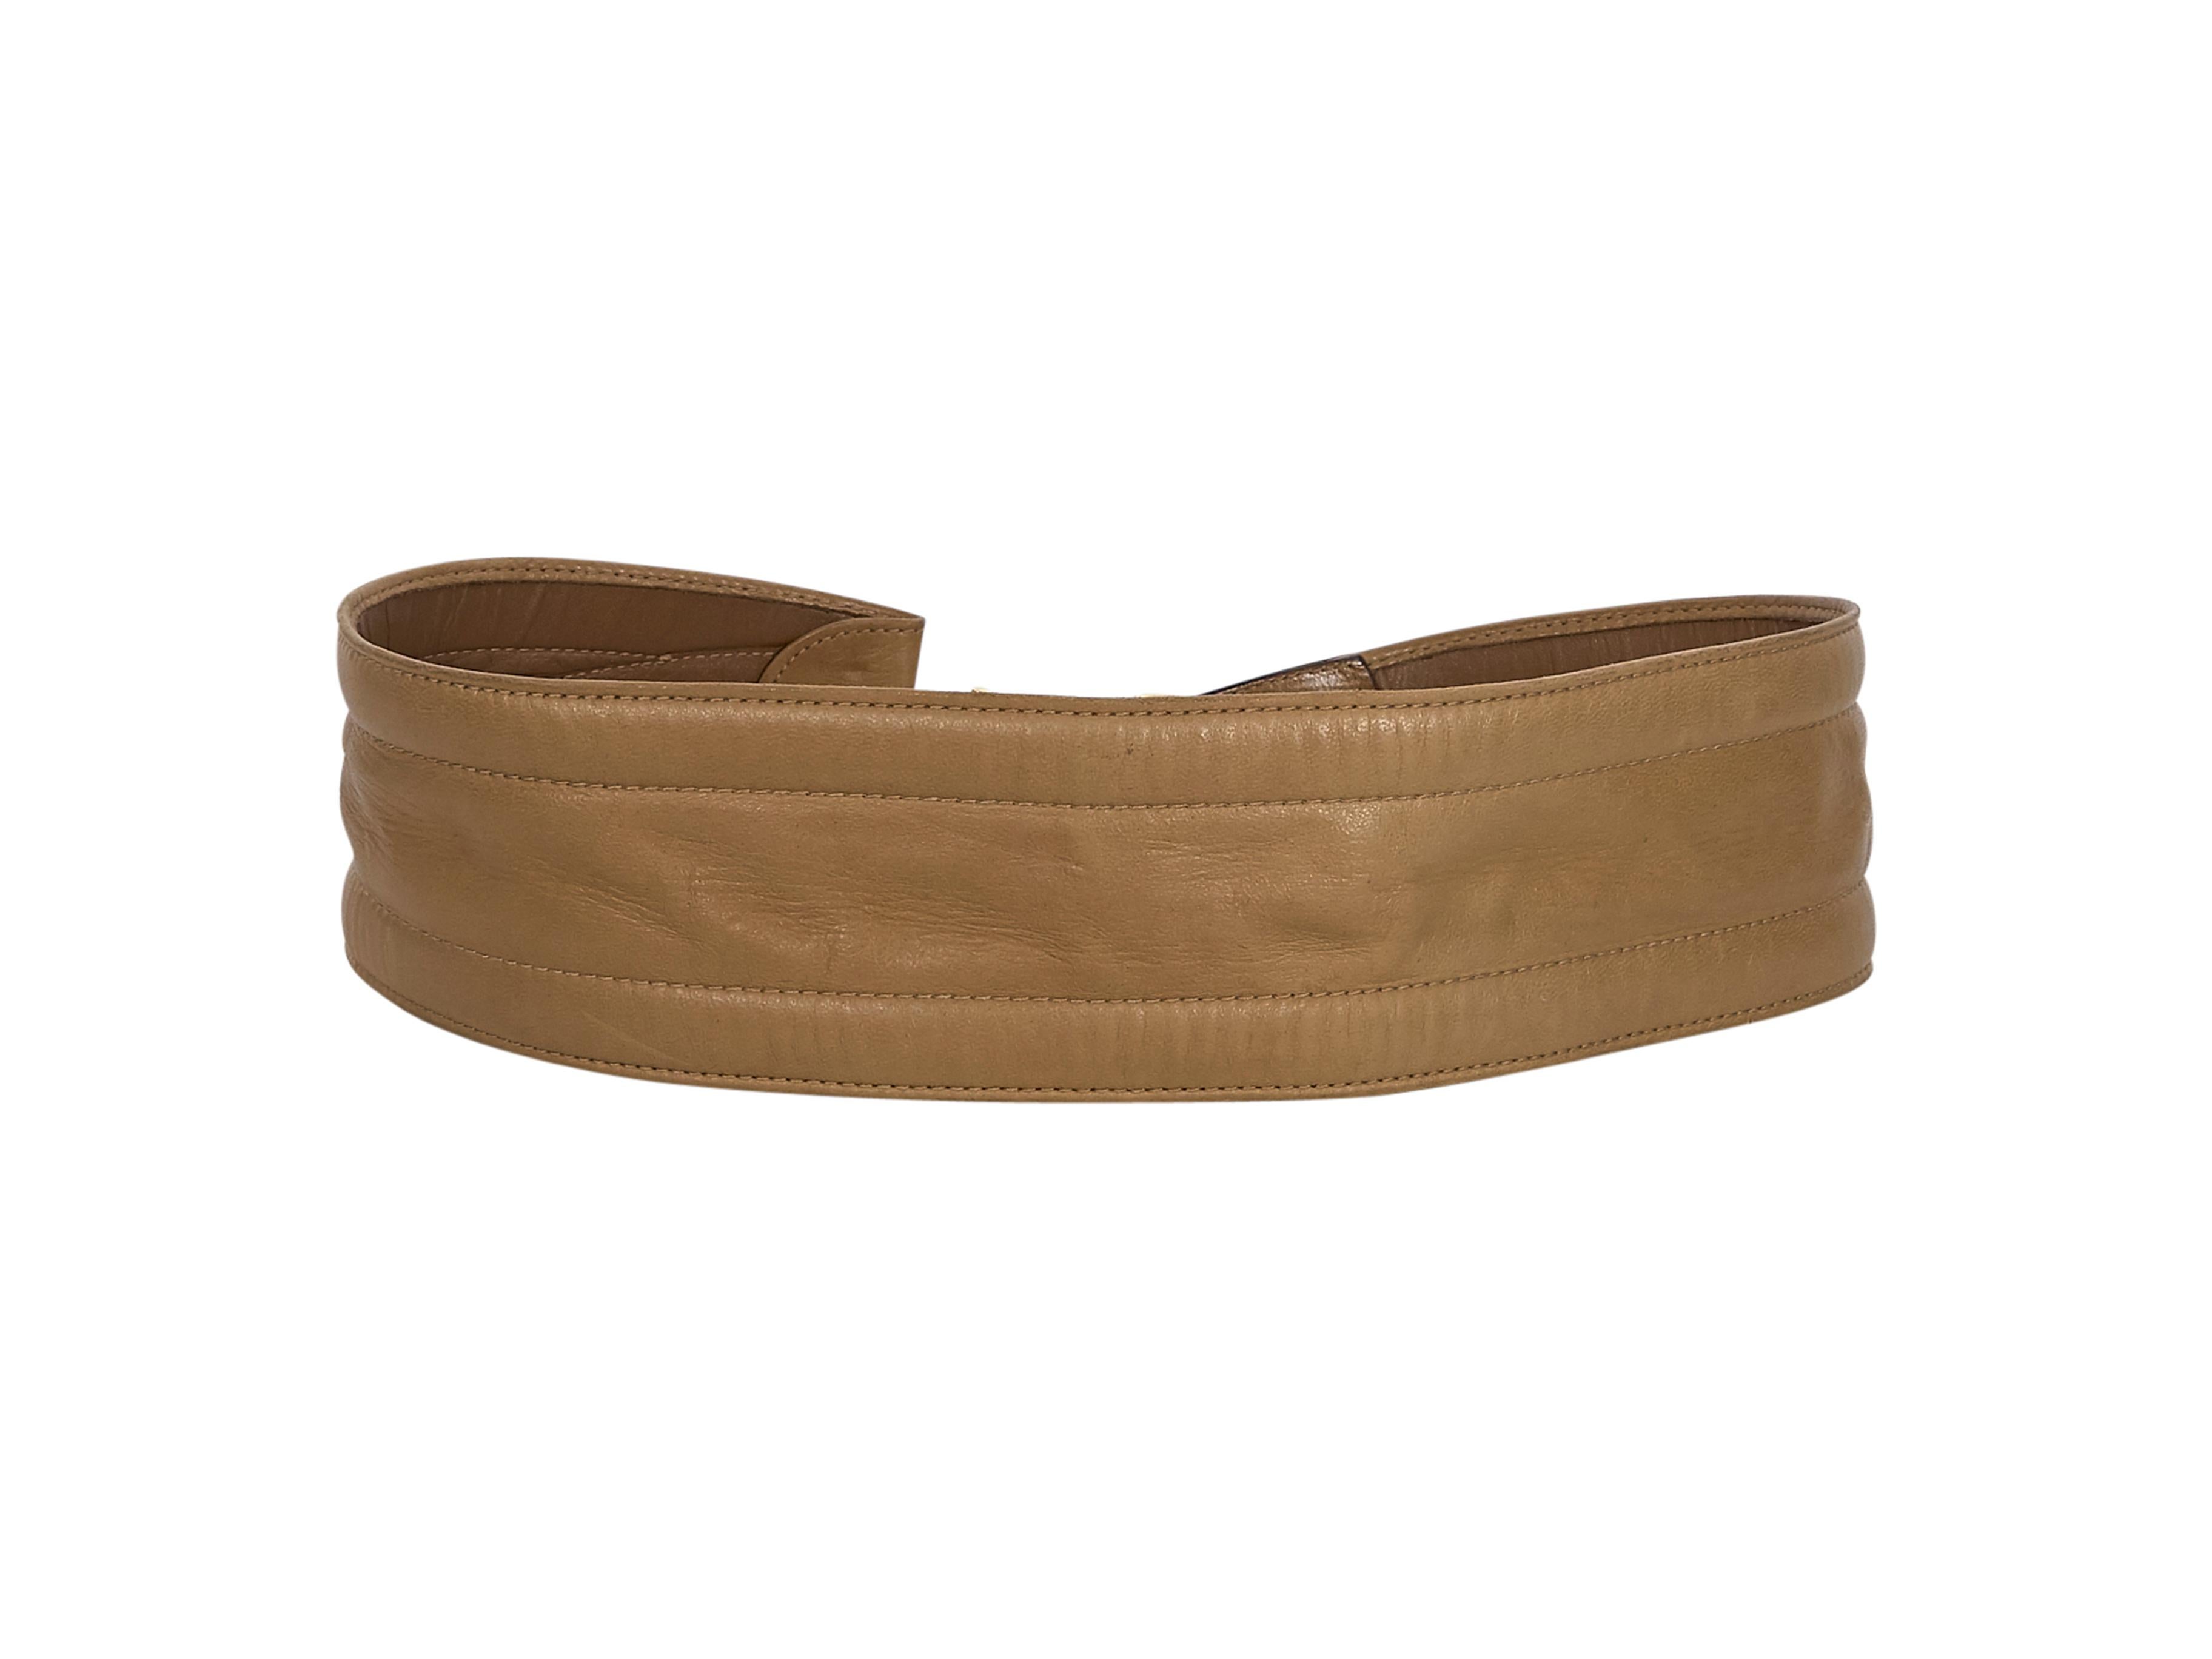 Product details:  Vintage tan leather wide belt by Gucci. Adjustable buckle closure. Gold-tone hardware. Style yours with an oversized blouson sleeve dress. 31